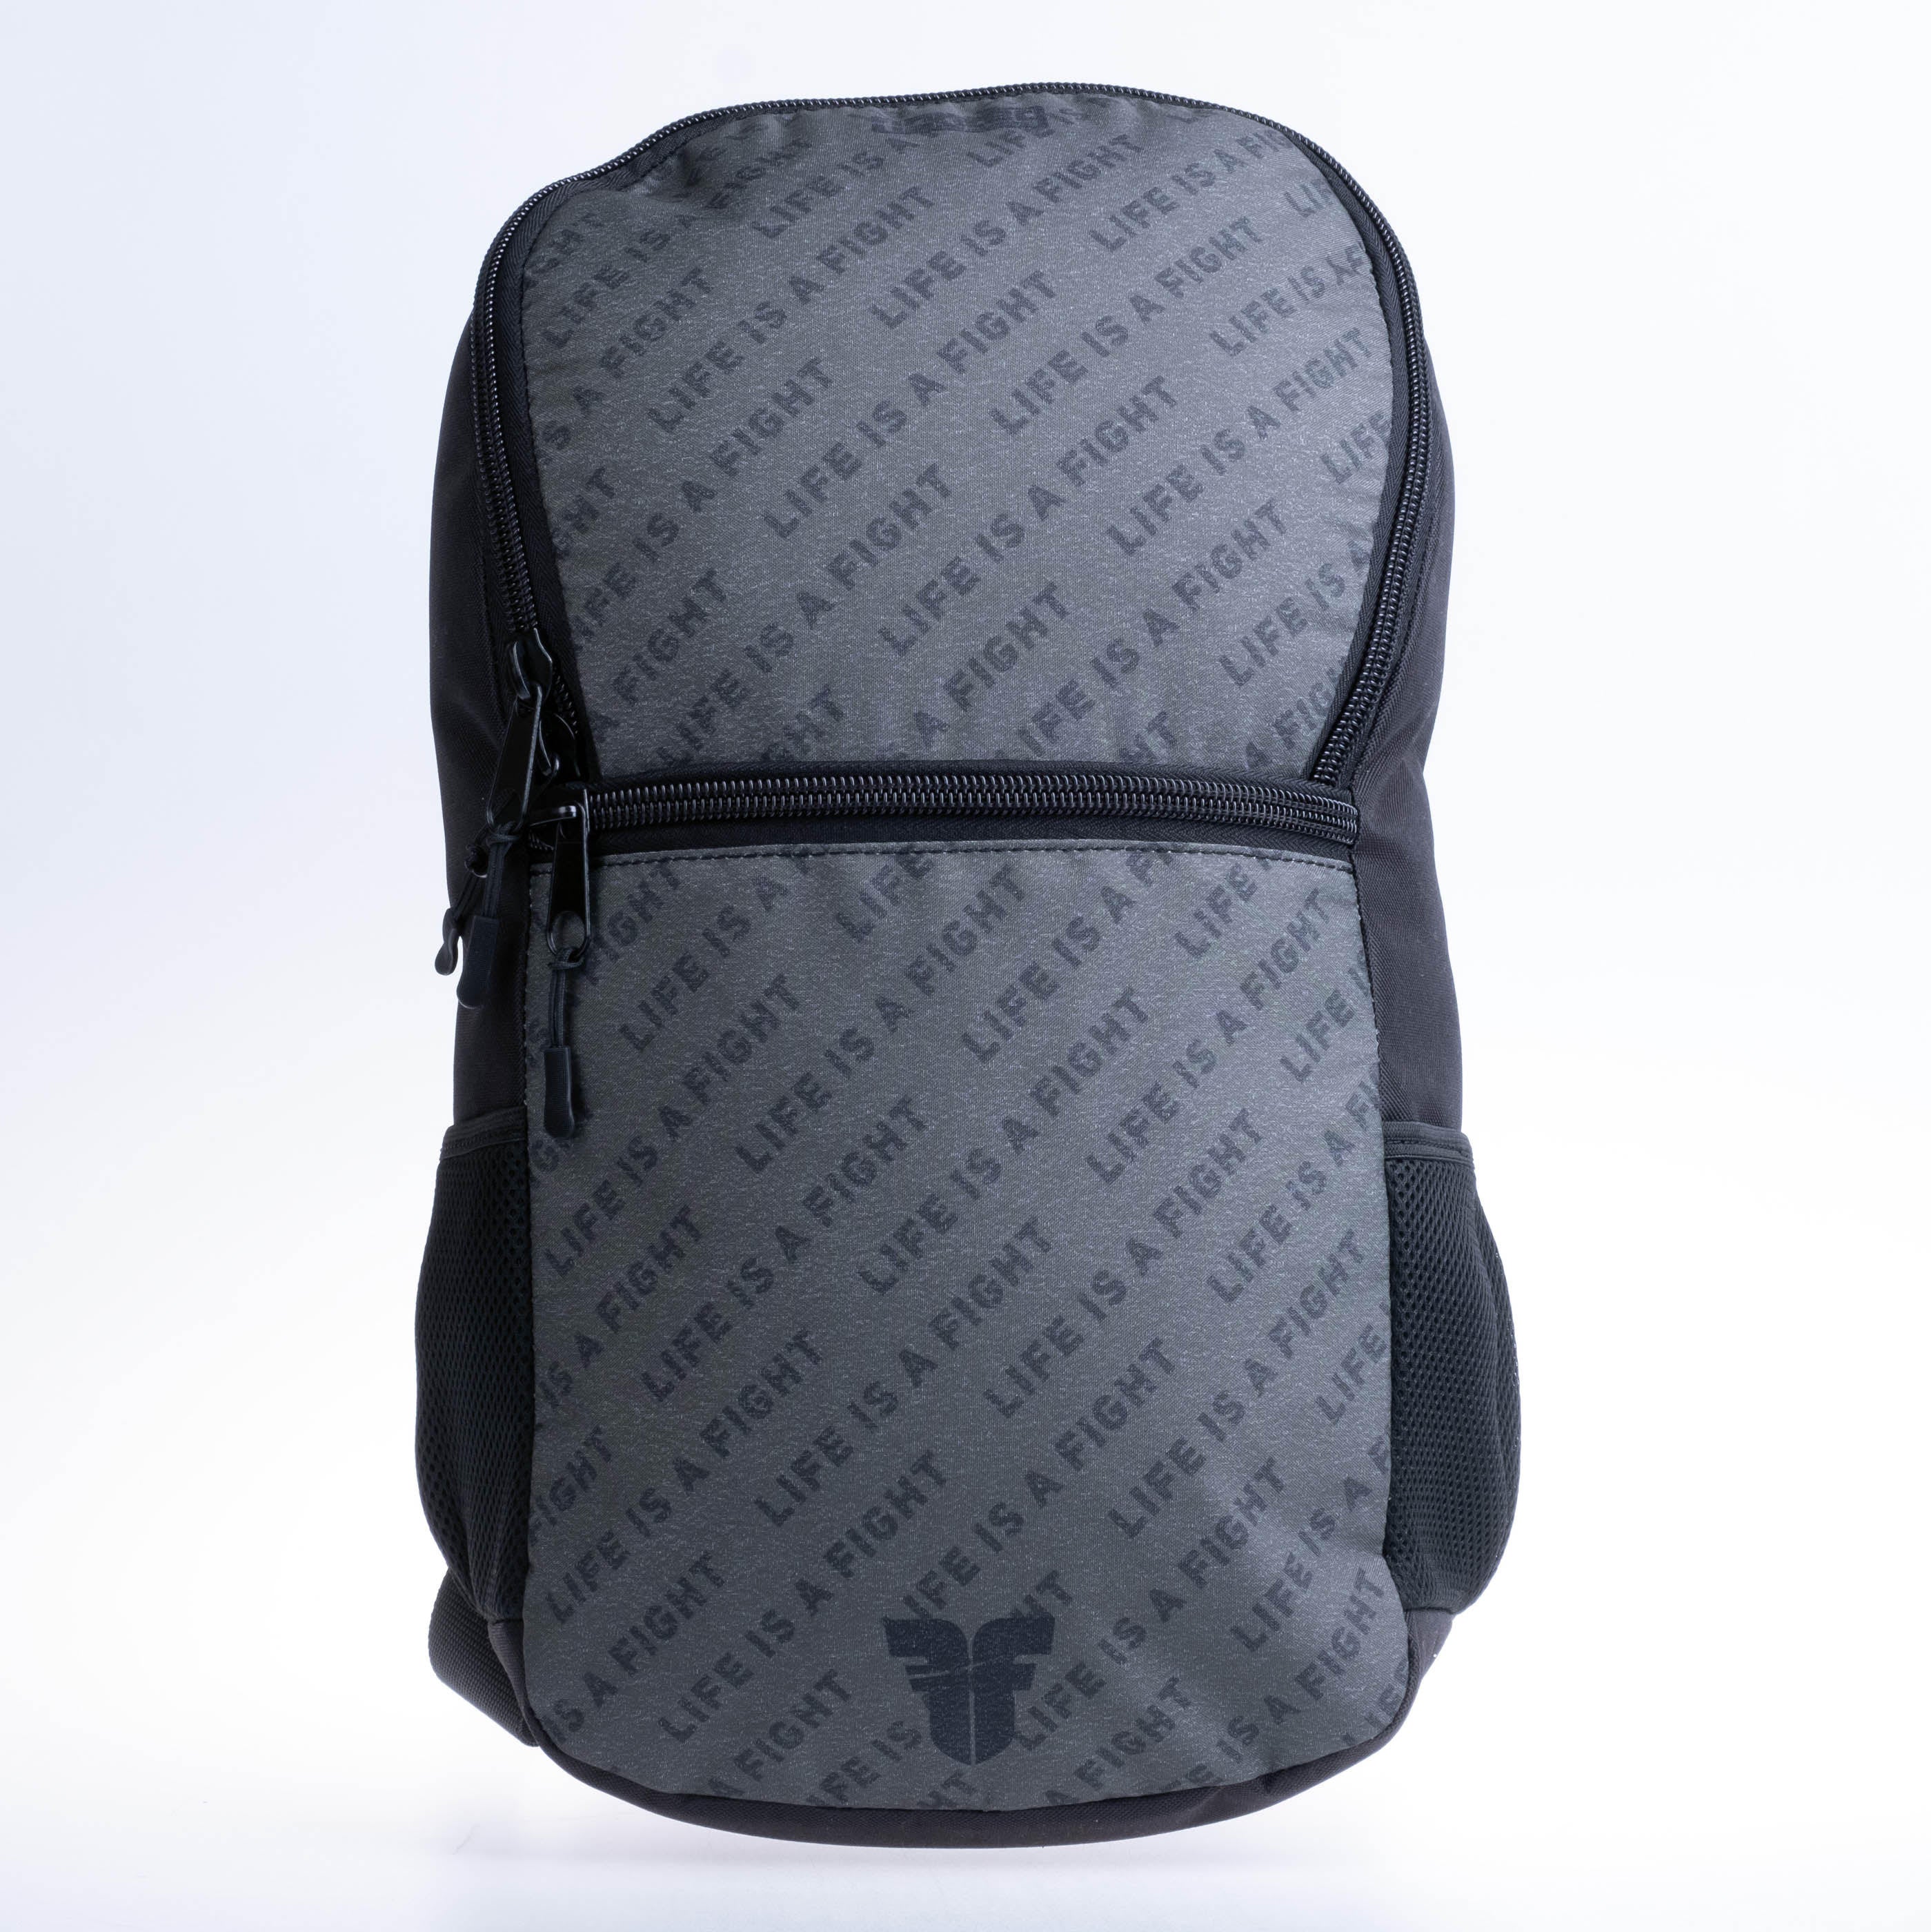 Fighter Backpack Size S - gray logo